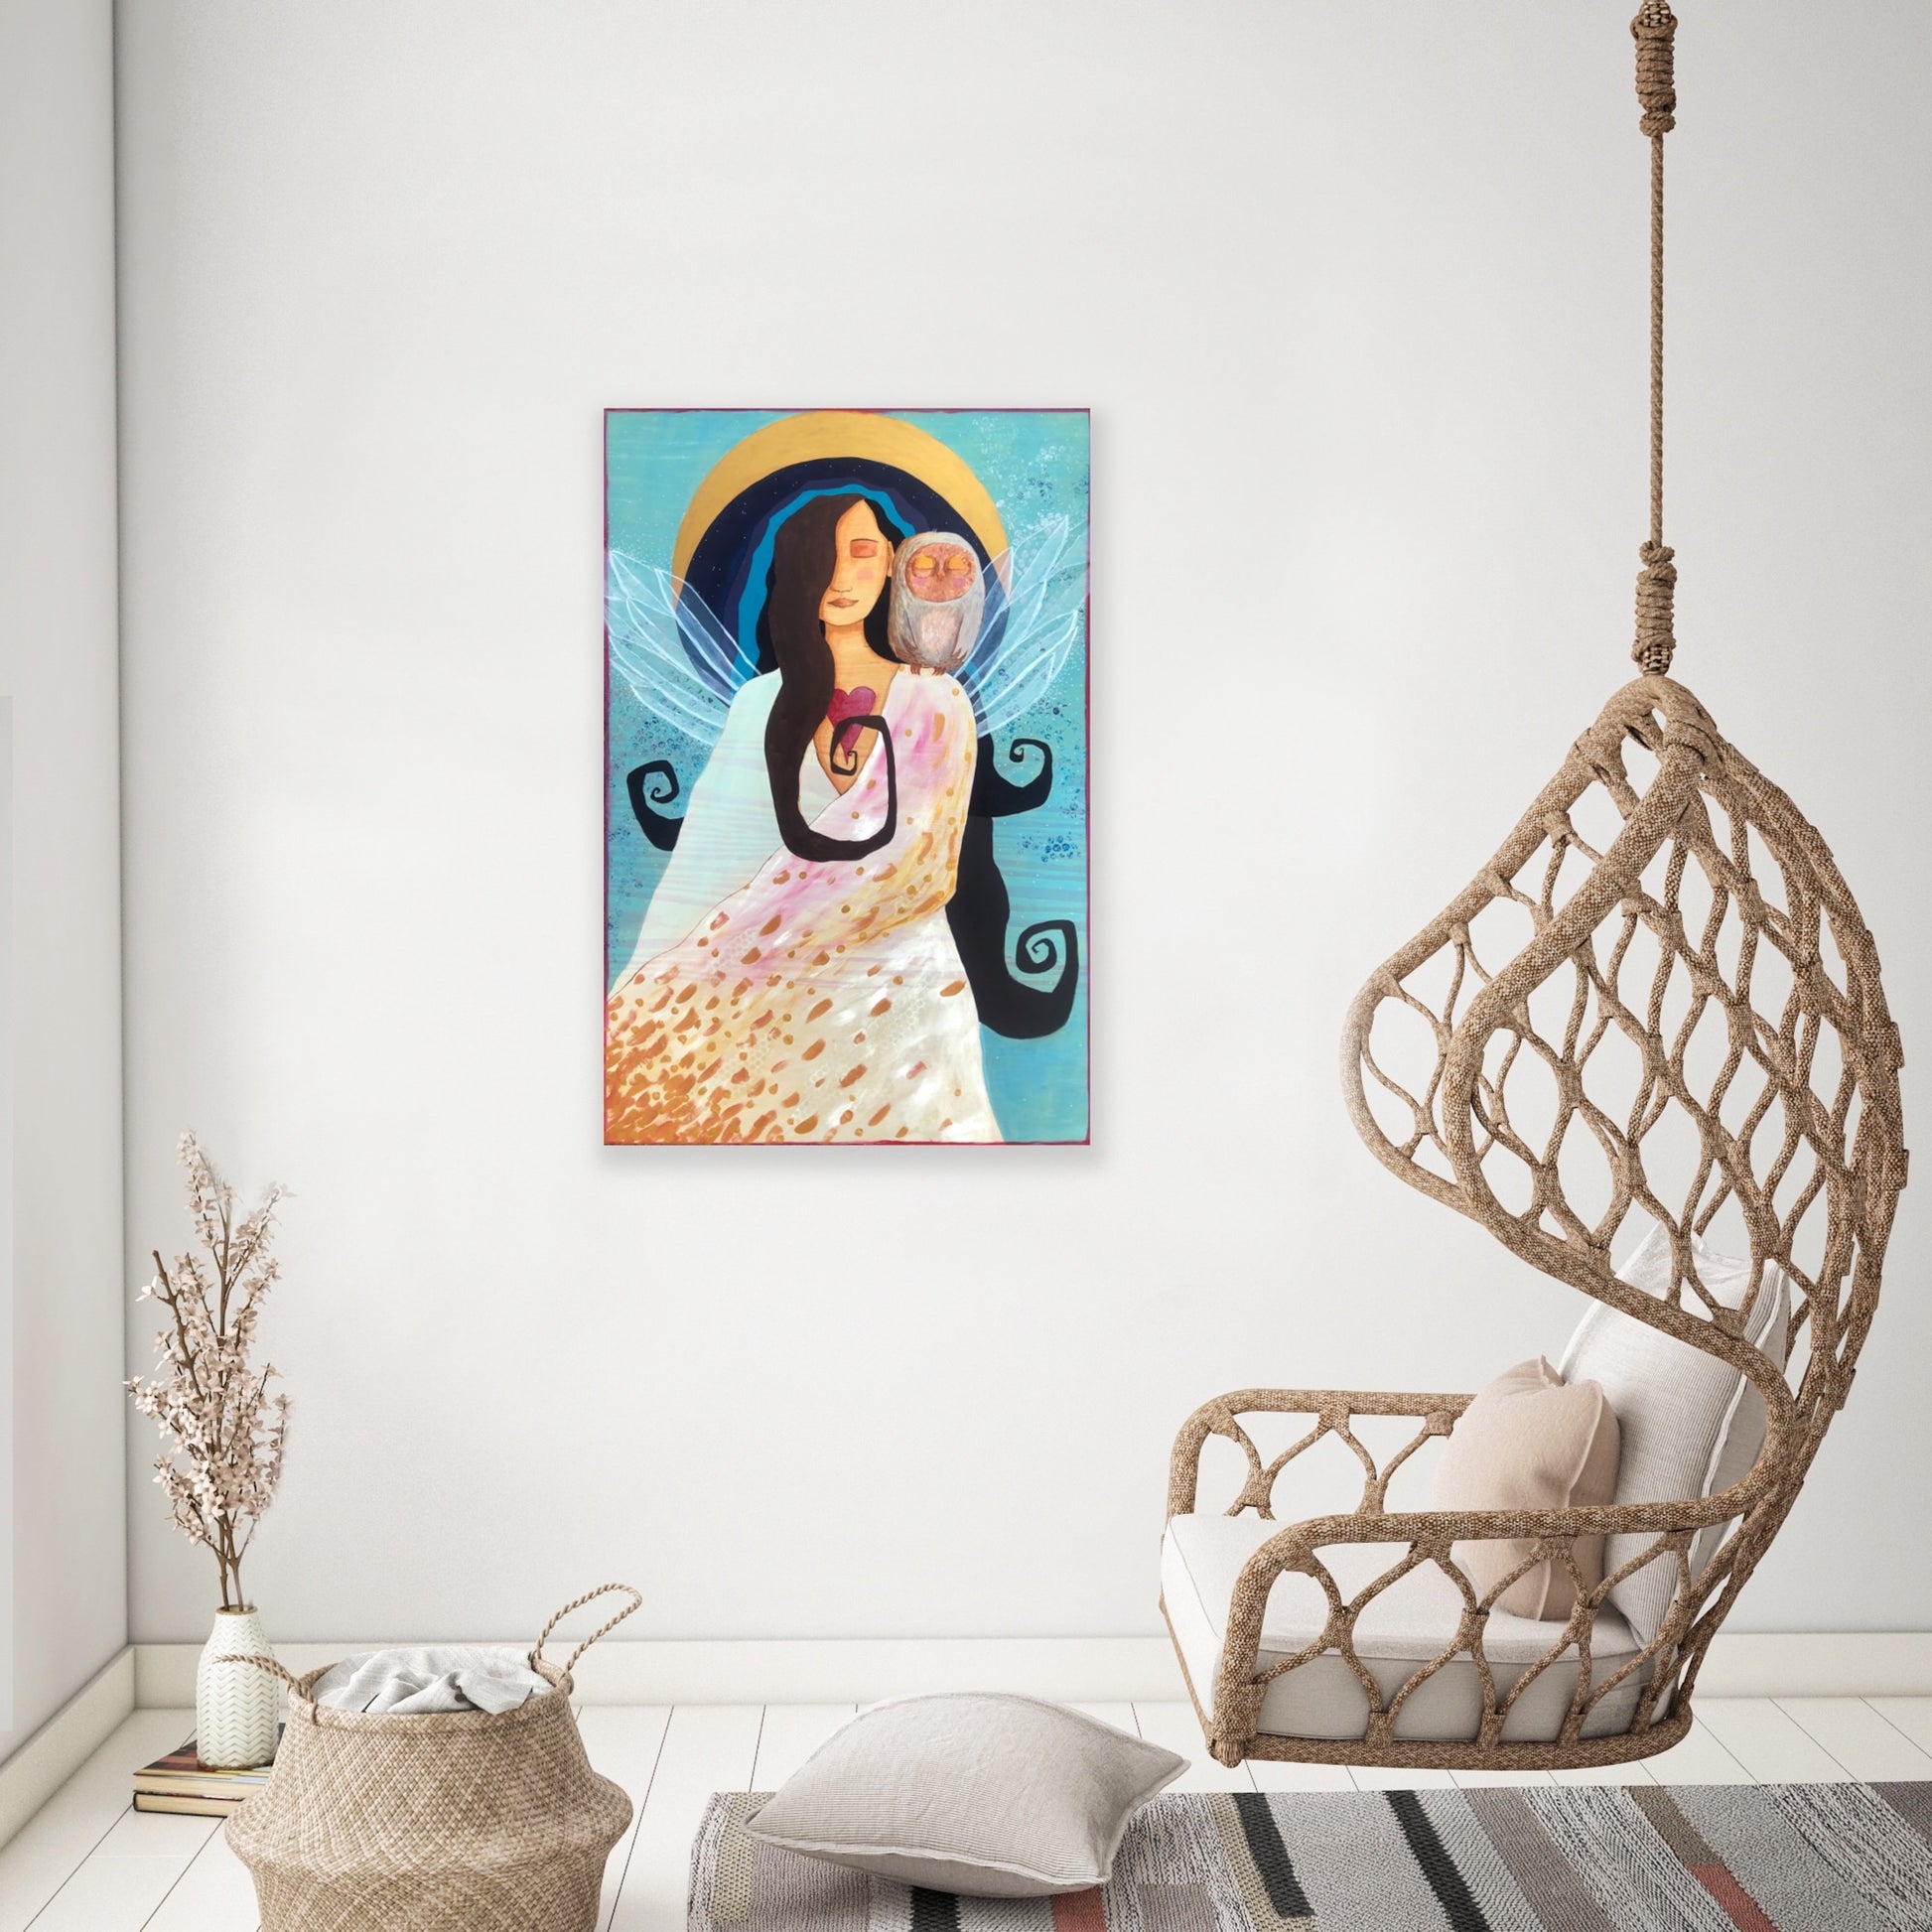 vibrant blue and gold artwork depicting a winged woman with an owl on her shoulder.  the painting is hanging on a white wall in a room with a wicker basket and a wicker chair suspended from the ceiling.